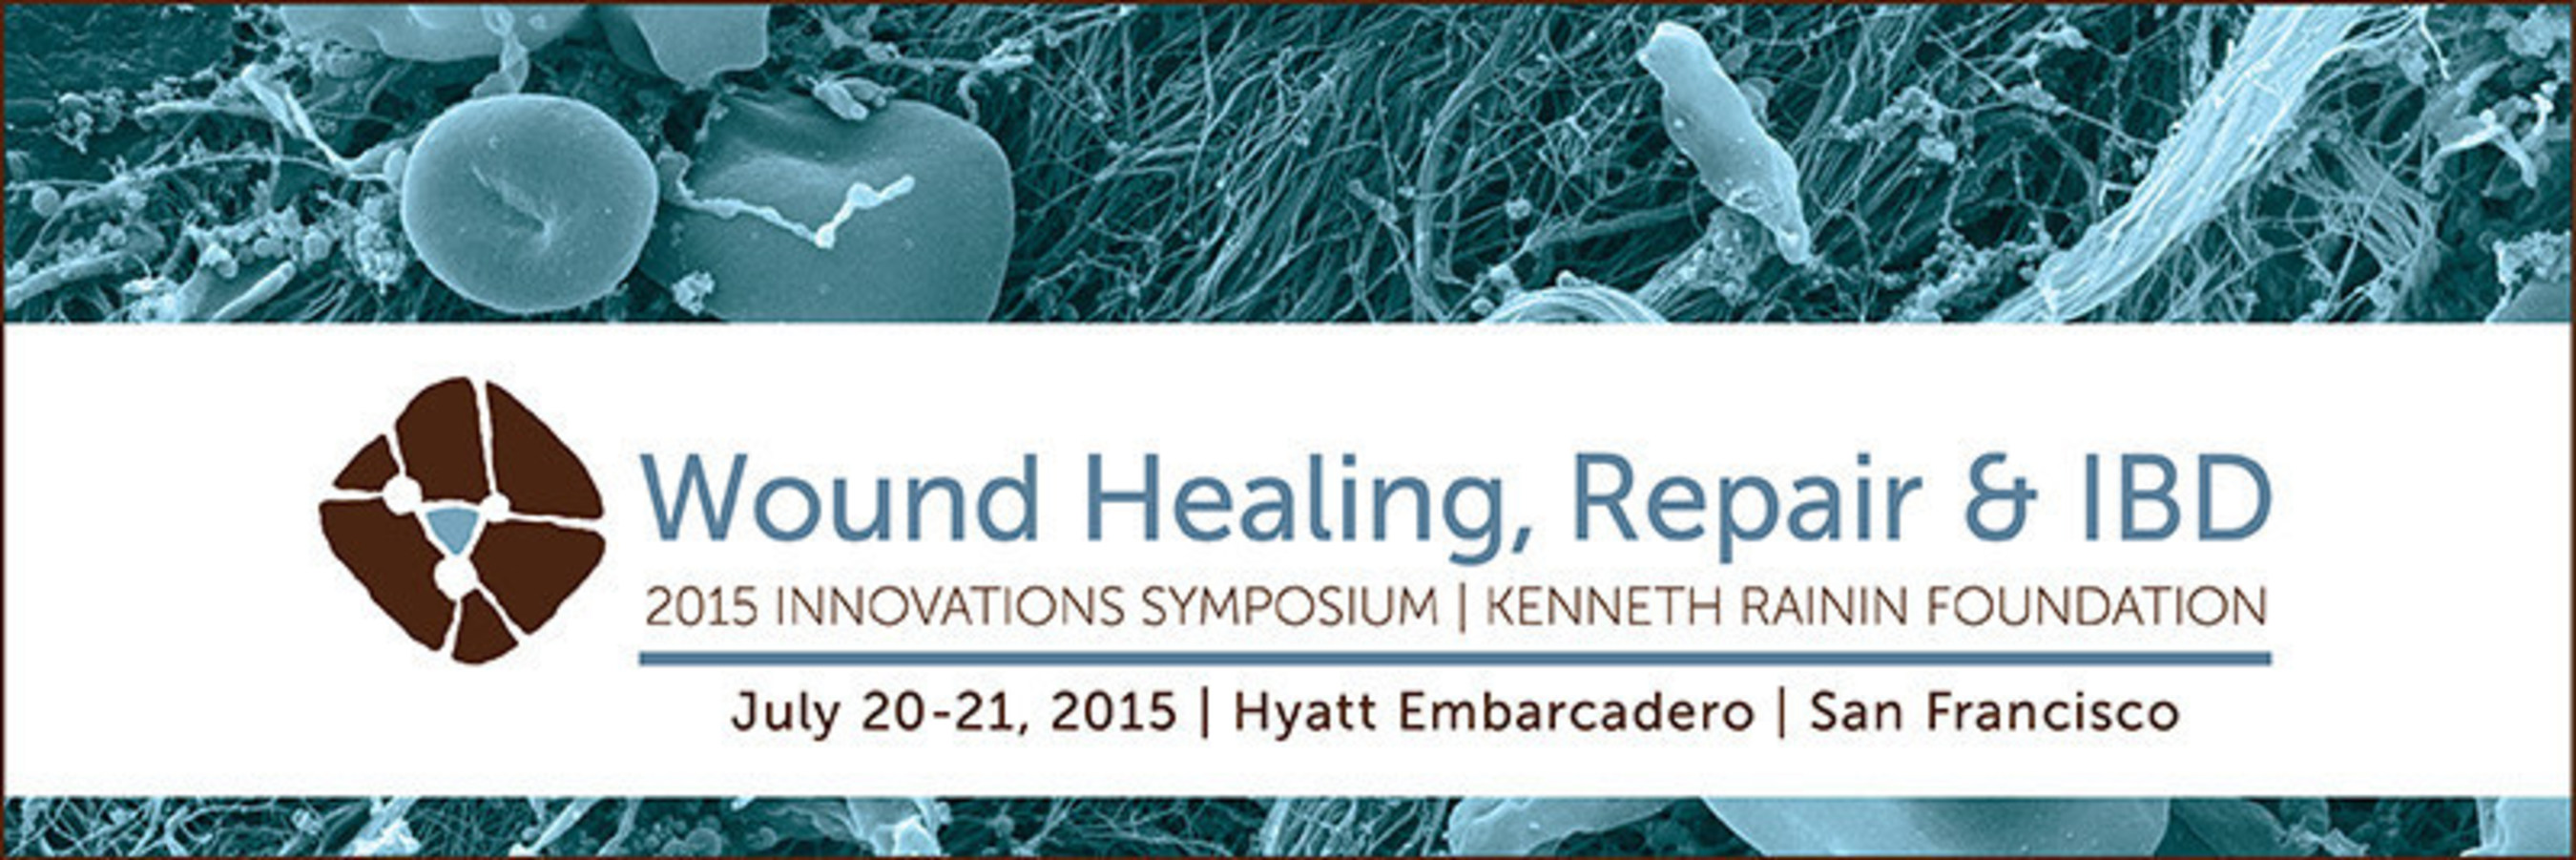 Join us for the 2015 Innovations Symposium: Wound Healing, Repair & IBD, and take part in setting new directions in the field of IBD research. We hope to see you in San Francisco in July!